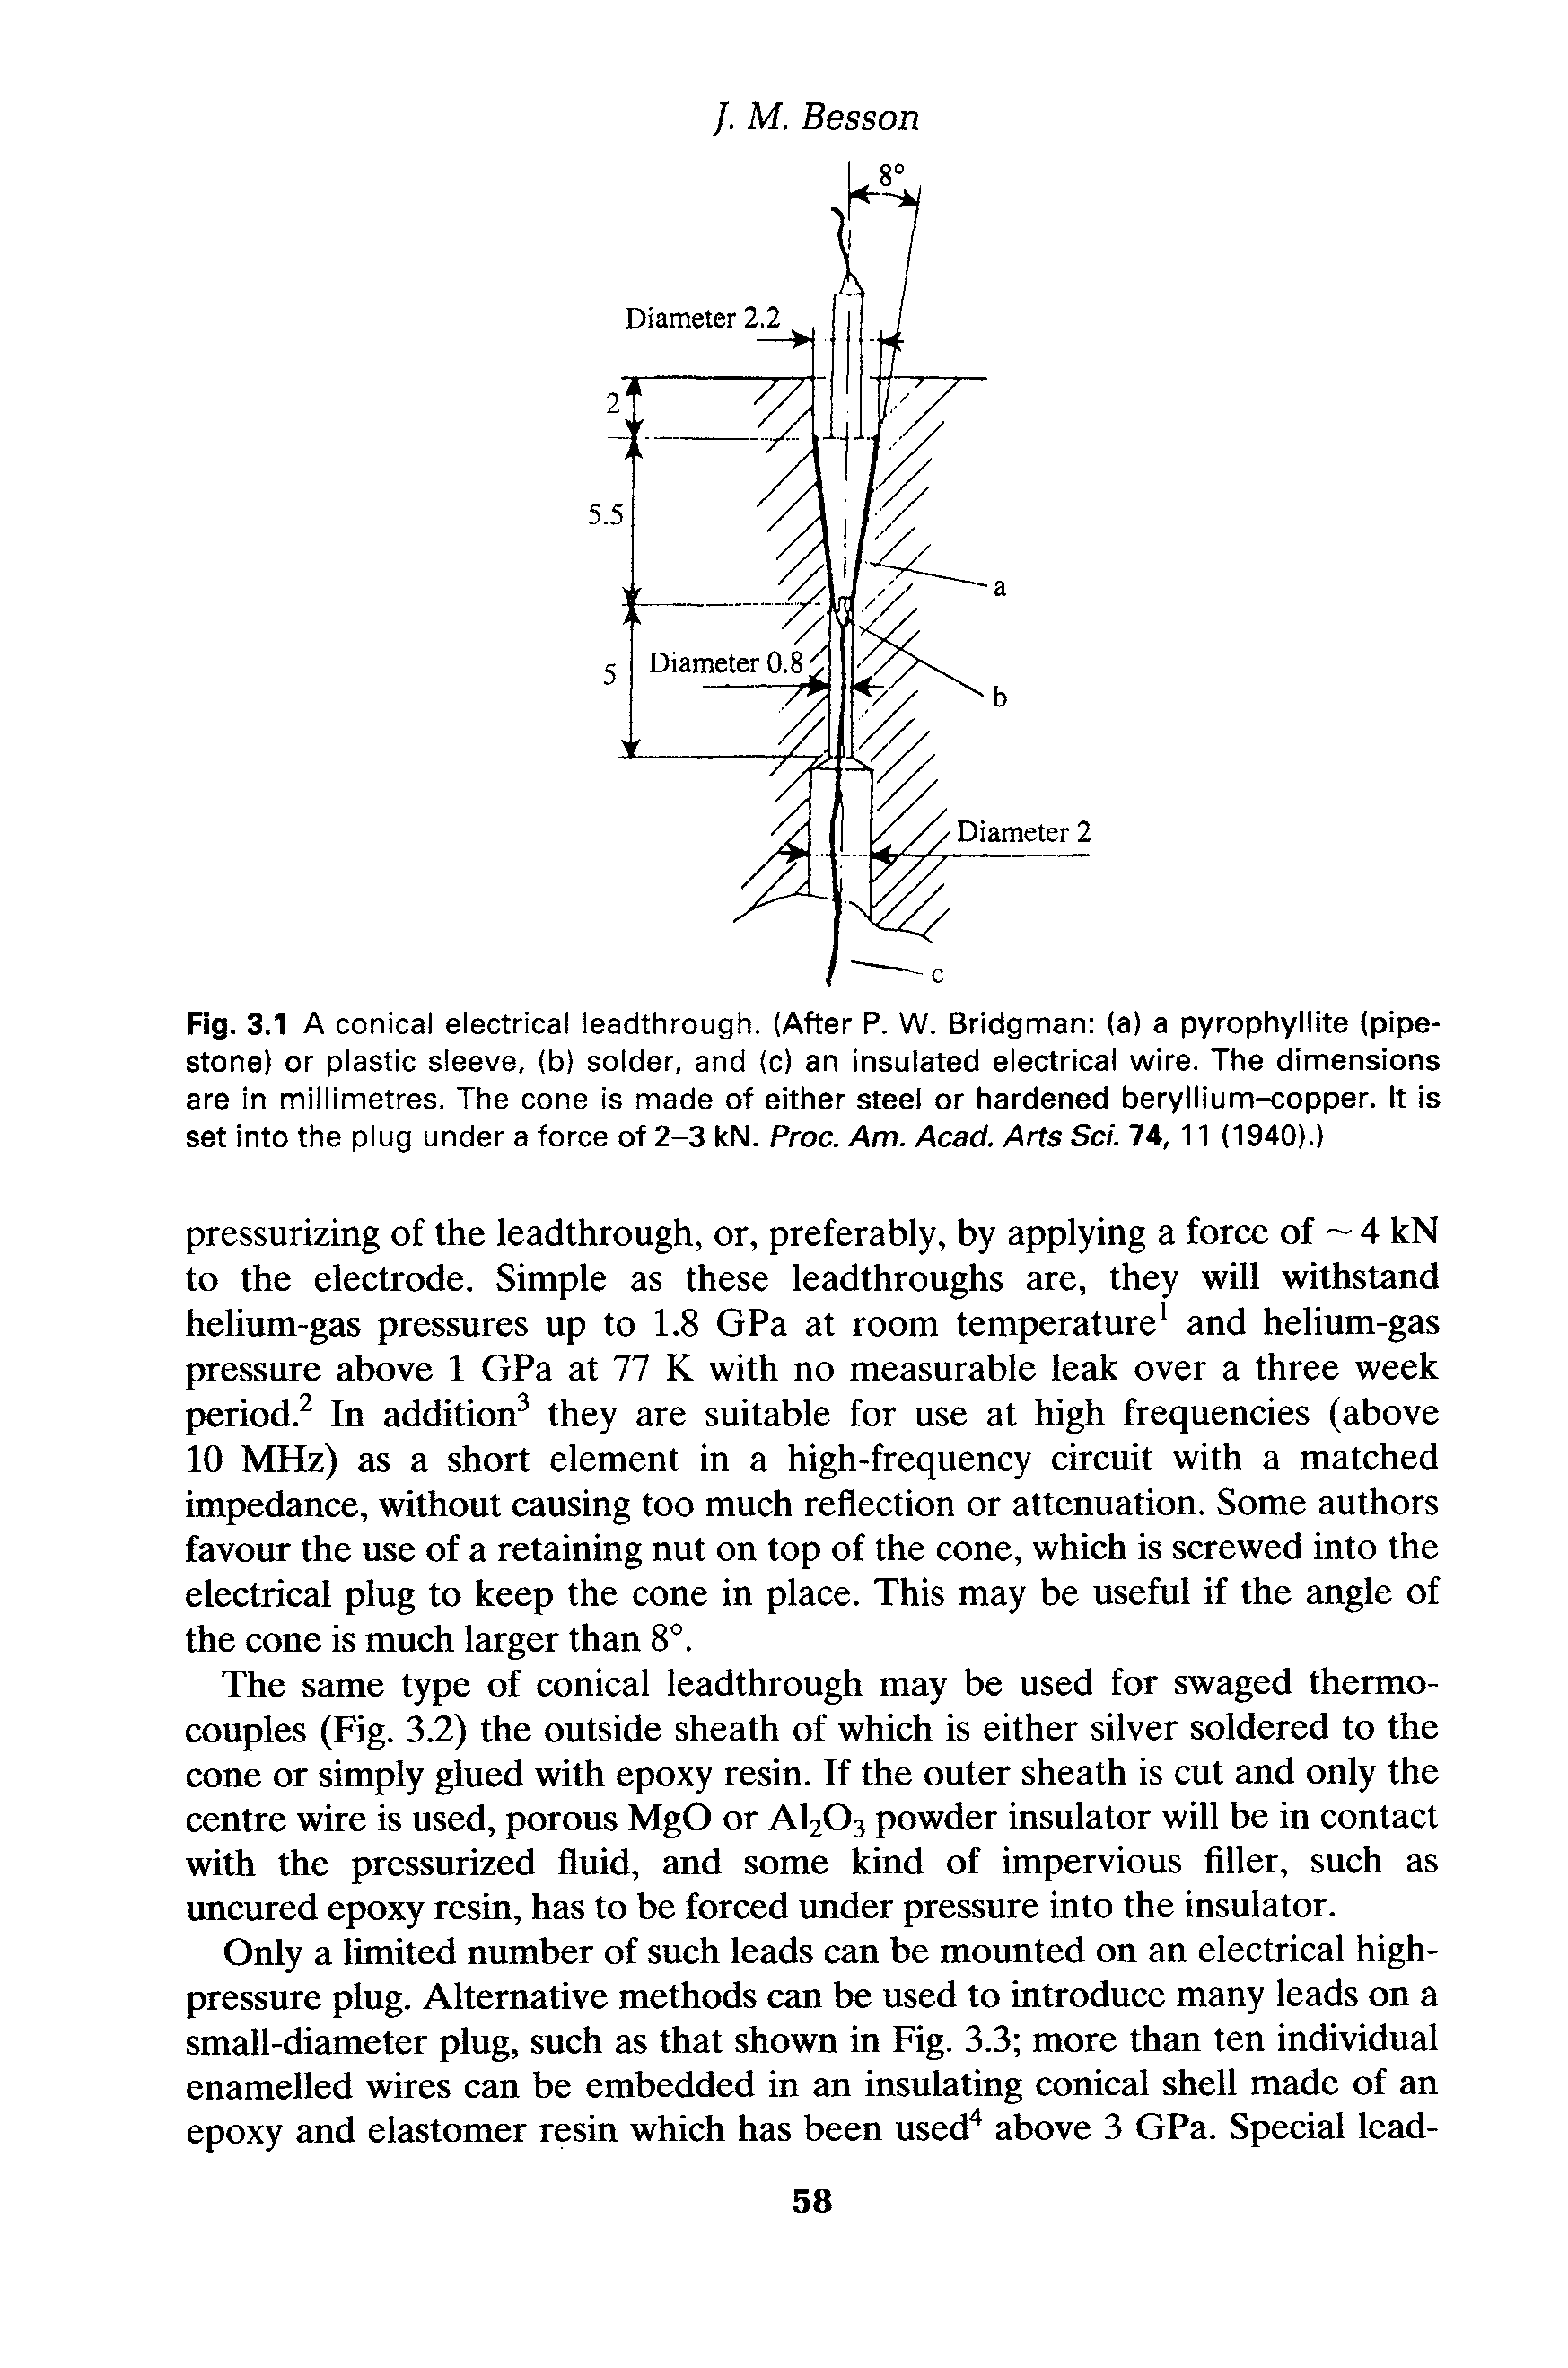 Fig. 3.1 A conical electrical leadthrough. (After P. W. Bridgman (a) a pyrophyllite (pipe-stone) or plastic sleeve, (b) solder, and (c) an insulated electrical wire. The dimensions are in millimetres. The cone is made of either steel or hardened beryllium-copper. It is set into the plug under a force of 2-3 kN. Proc. Am. Acad. Arts Sci. 74, 11 (1940).)...